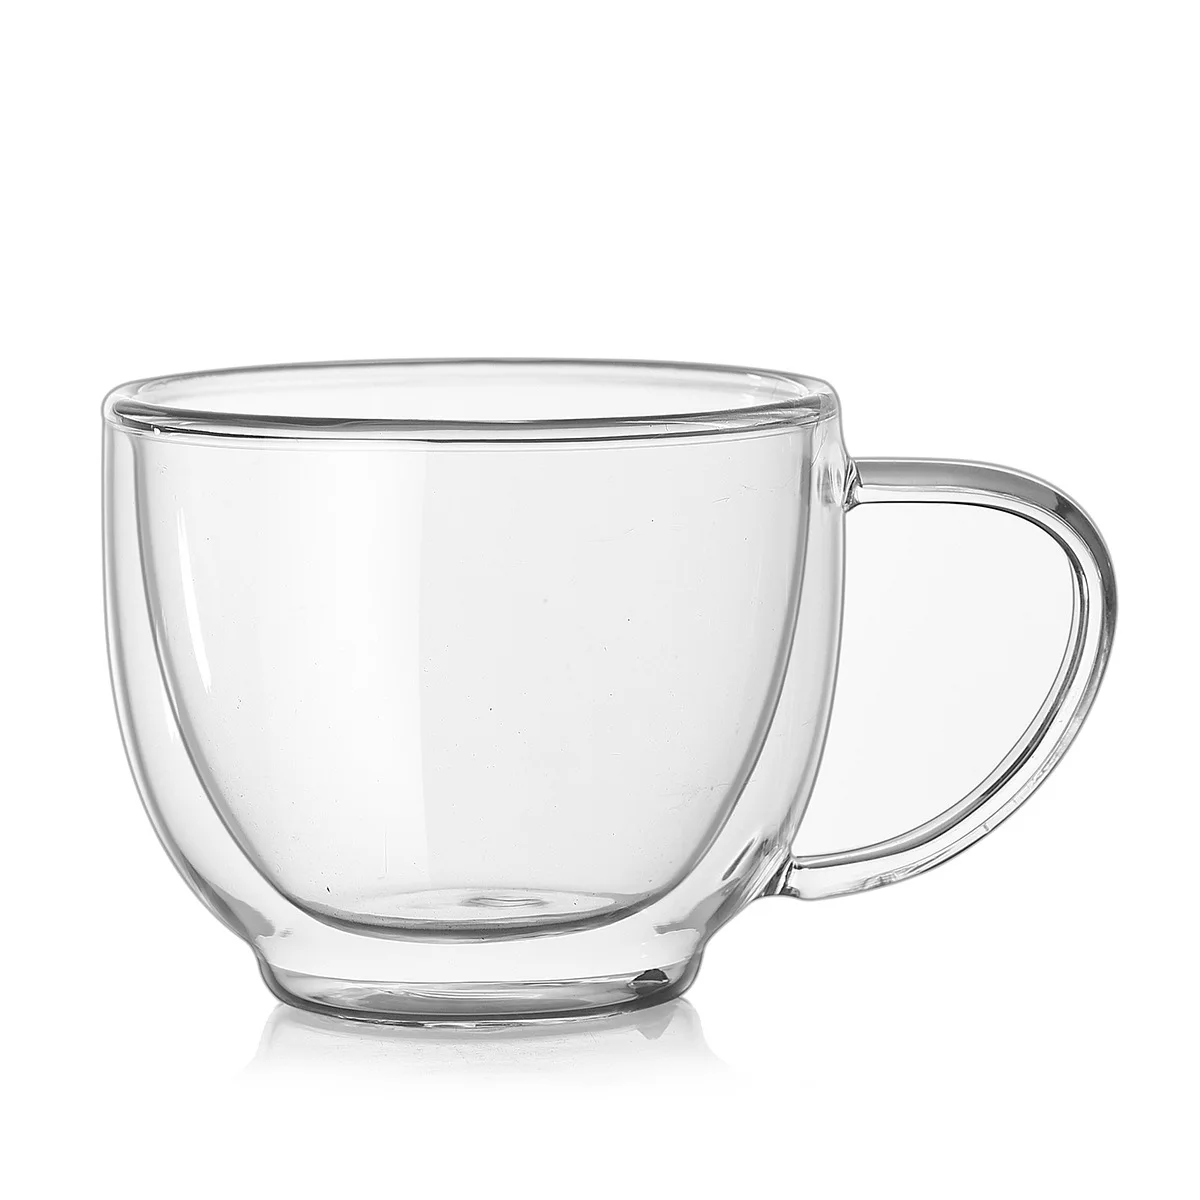 https://ae01.alicdn.com/kf/HTB1JyhNdjfguuRjSszcq6zb7FXaL/200ml-simple-transparent-coffee-cup-double-layer-glass-mug-with-handle-high-temperature-cappuccino-coffee-cup.jpg